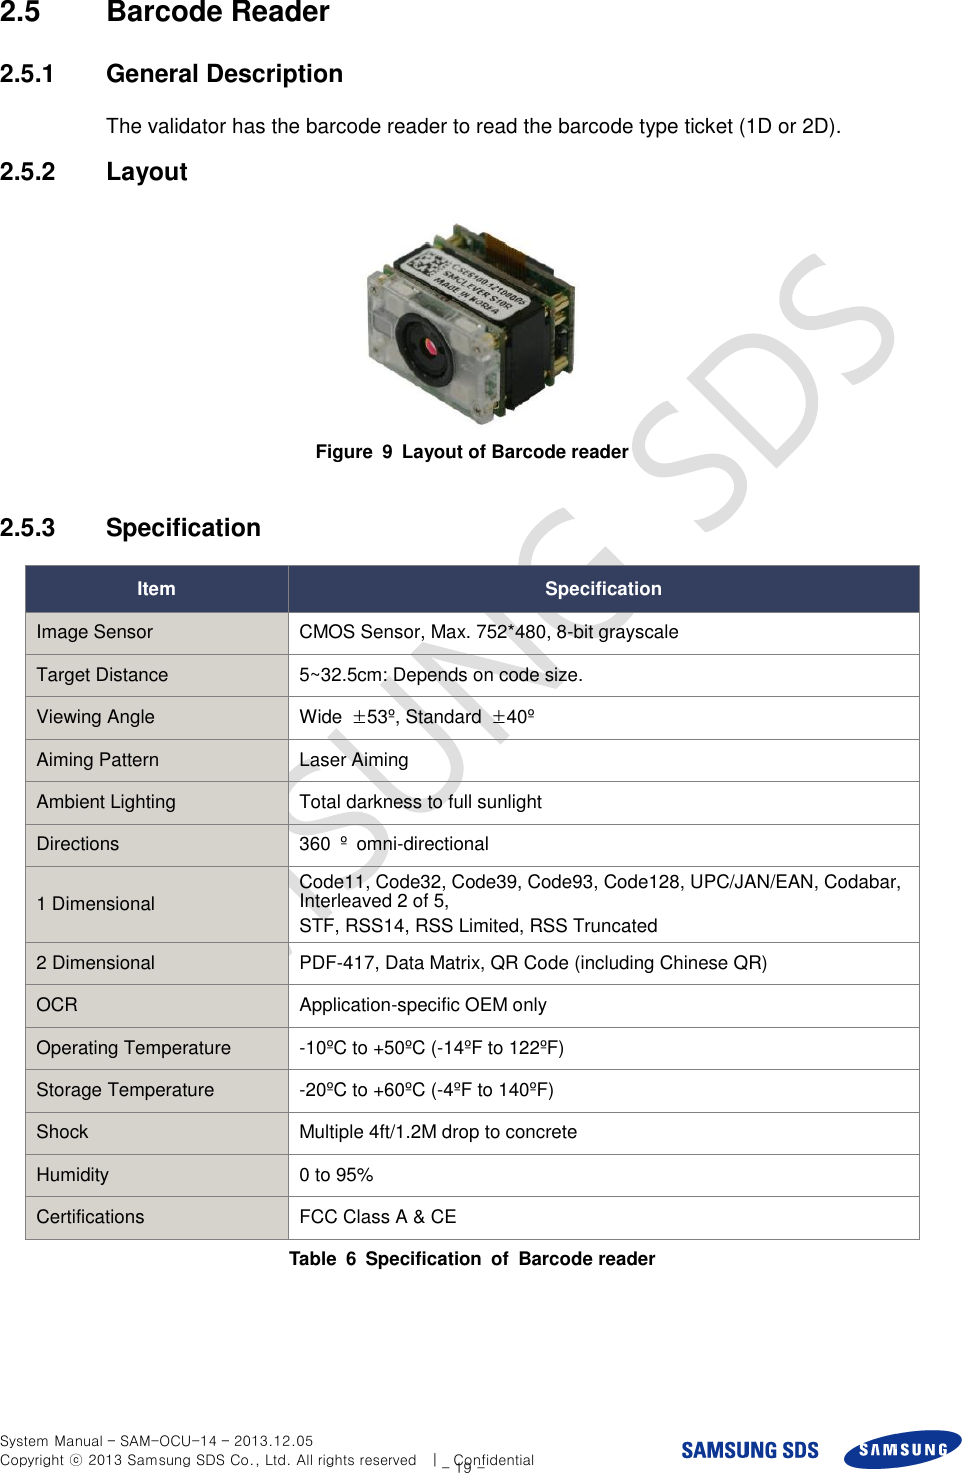  System Manual – SAM-OCU-14 – 2013.12.05 Copyright ⓒ 2013 Samsung SDS Co., Ltd. All rights reserved    |    Confidential - 19 - 2.5  Barcode Reader 2.5.1  General Description The validator has the barcode reader to read the barcode type ticket (1D or 2D). 2.5.2  Layout  Figure  9  Layout of Barcode reader  2.5.3  Specification Item Specification Image Sensor CMOS Sensor, Max. 752*480, 8-bit grayscale Target Distance   5~32.5cm: Depends on code size. Viewing Angle Wide  ±53º, Standard  ±40º Aiming Pattern Laser Aiming Ambient Lighting Total darkness to full sunlight Directions 360  º  omni-directional 1 Dimensional Code11, Code32, Code39, Code93, Code128, UPC/JAN/EAN, Codabar, Interleaved 2 of 5, STF, RSS14, RSS Limited, RSS Truncated 2 Dimensional PDF-417, Data Matrix, QR Code (including Chinese QR) OCR Application-specific OEM only Operating Temperature -10ºC to +50ºC (-14ºF to 122ºF) Storage Temperature -20ºC to +60ºC (-4ºF to 140ºF) Shock Multiple 4ft/1.2M drop to concrete Humidity 0 to 95% Certifications FCC Class A &amp; CE Table  6  Specification  of  Barcode reader  